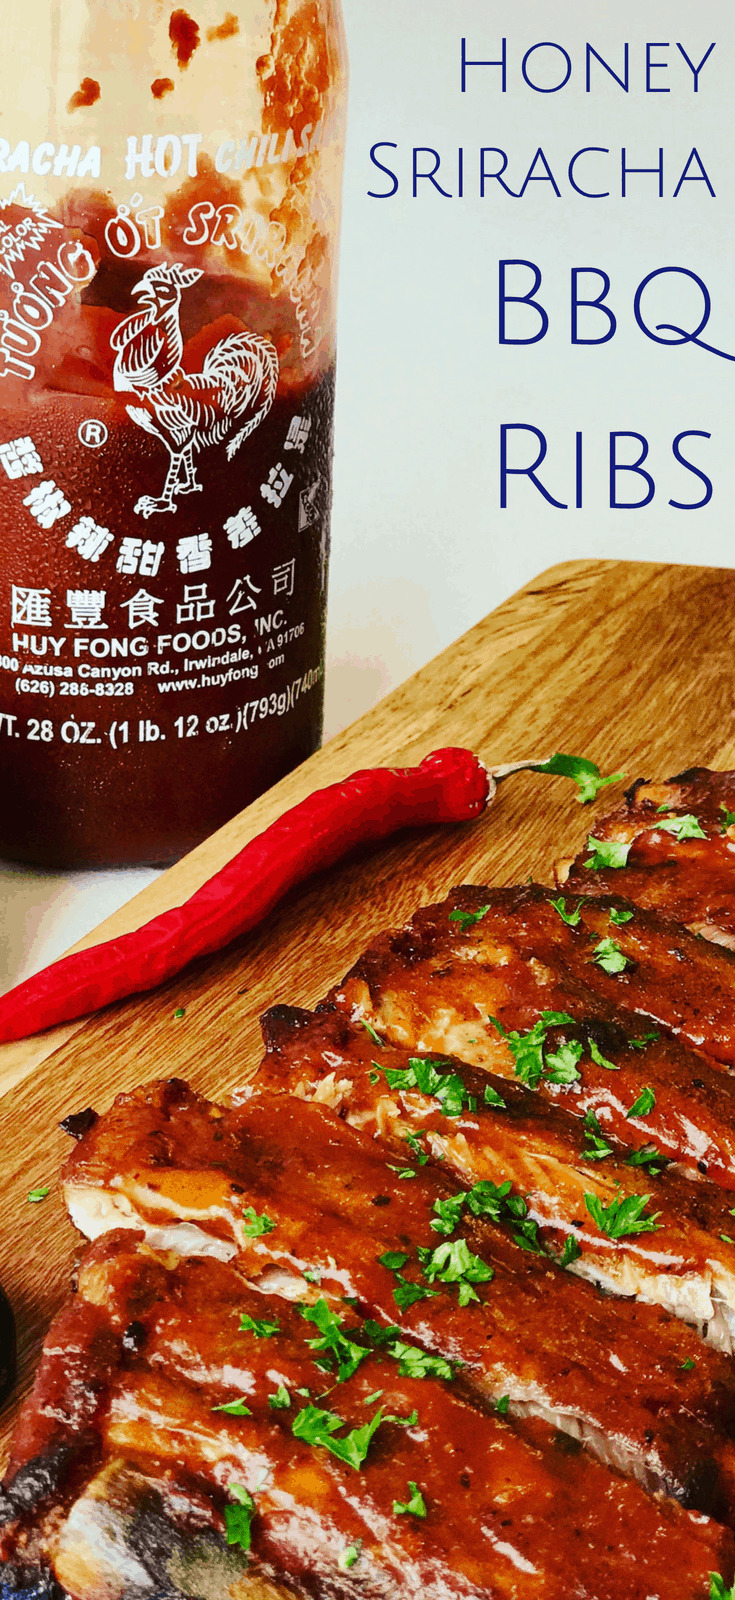 Ribs in Oven Fall off the Bones Recipe that's easy to make with a dry rub, so tender, basted with a perfect blend of Honey Sriracha Bbq sauce. Finger licking good!